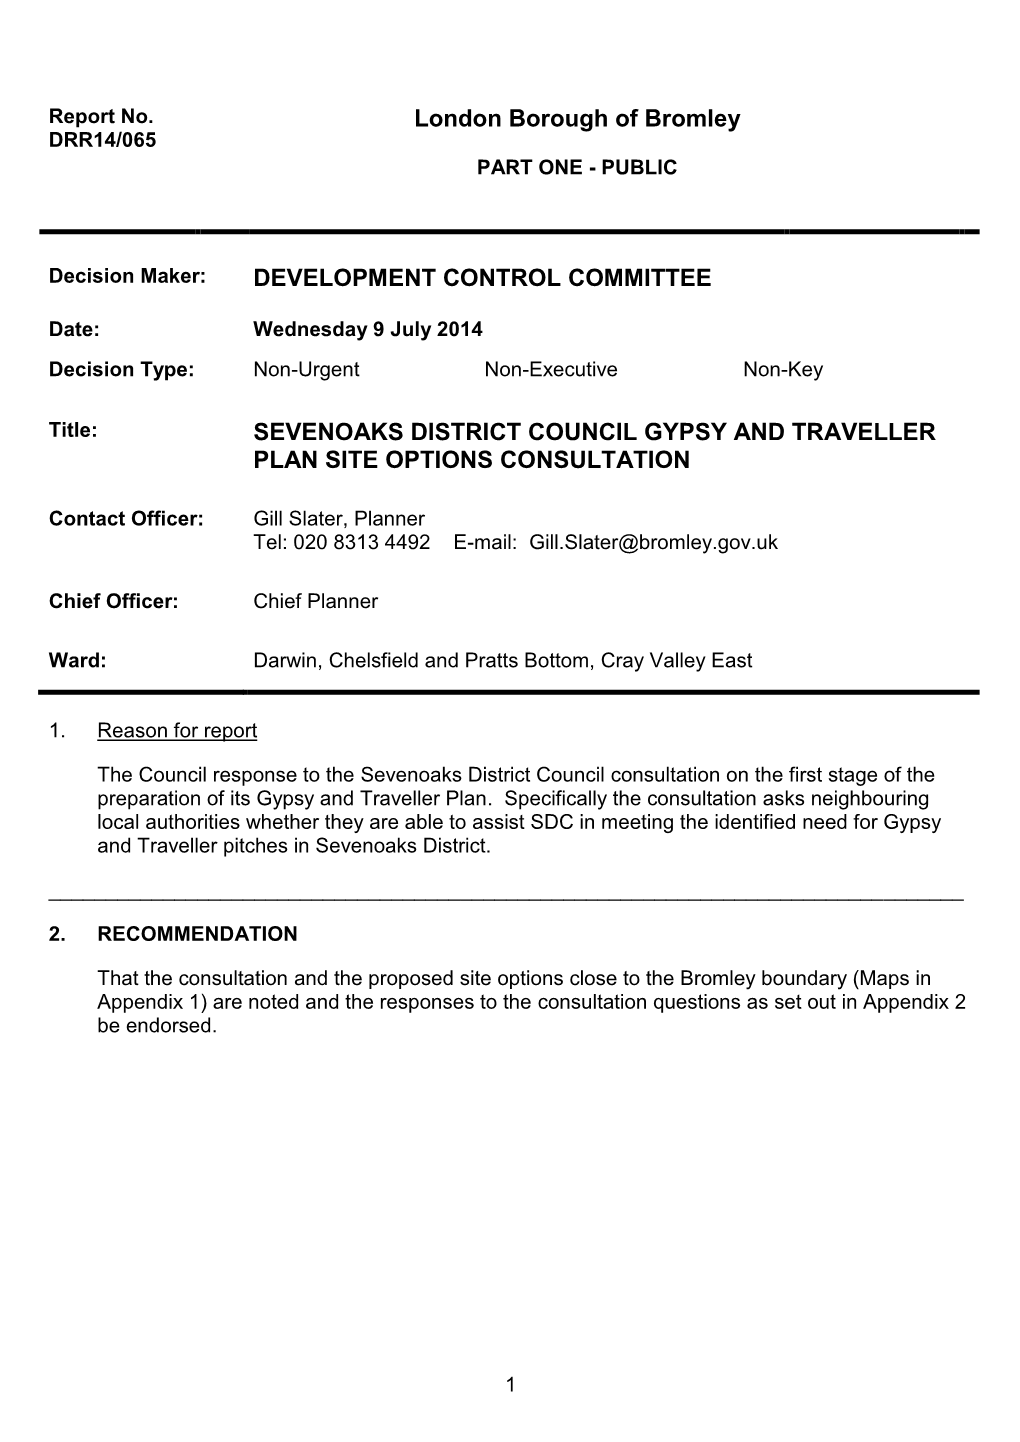 Sevenoaks District Council Gypsy and Traveller Plan Site Options Consultation